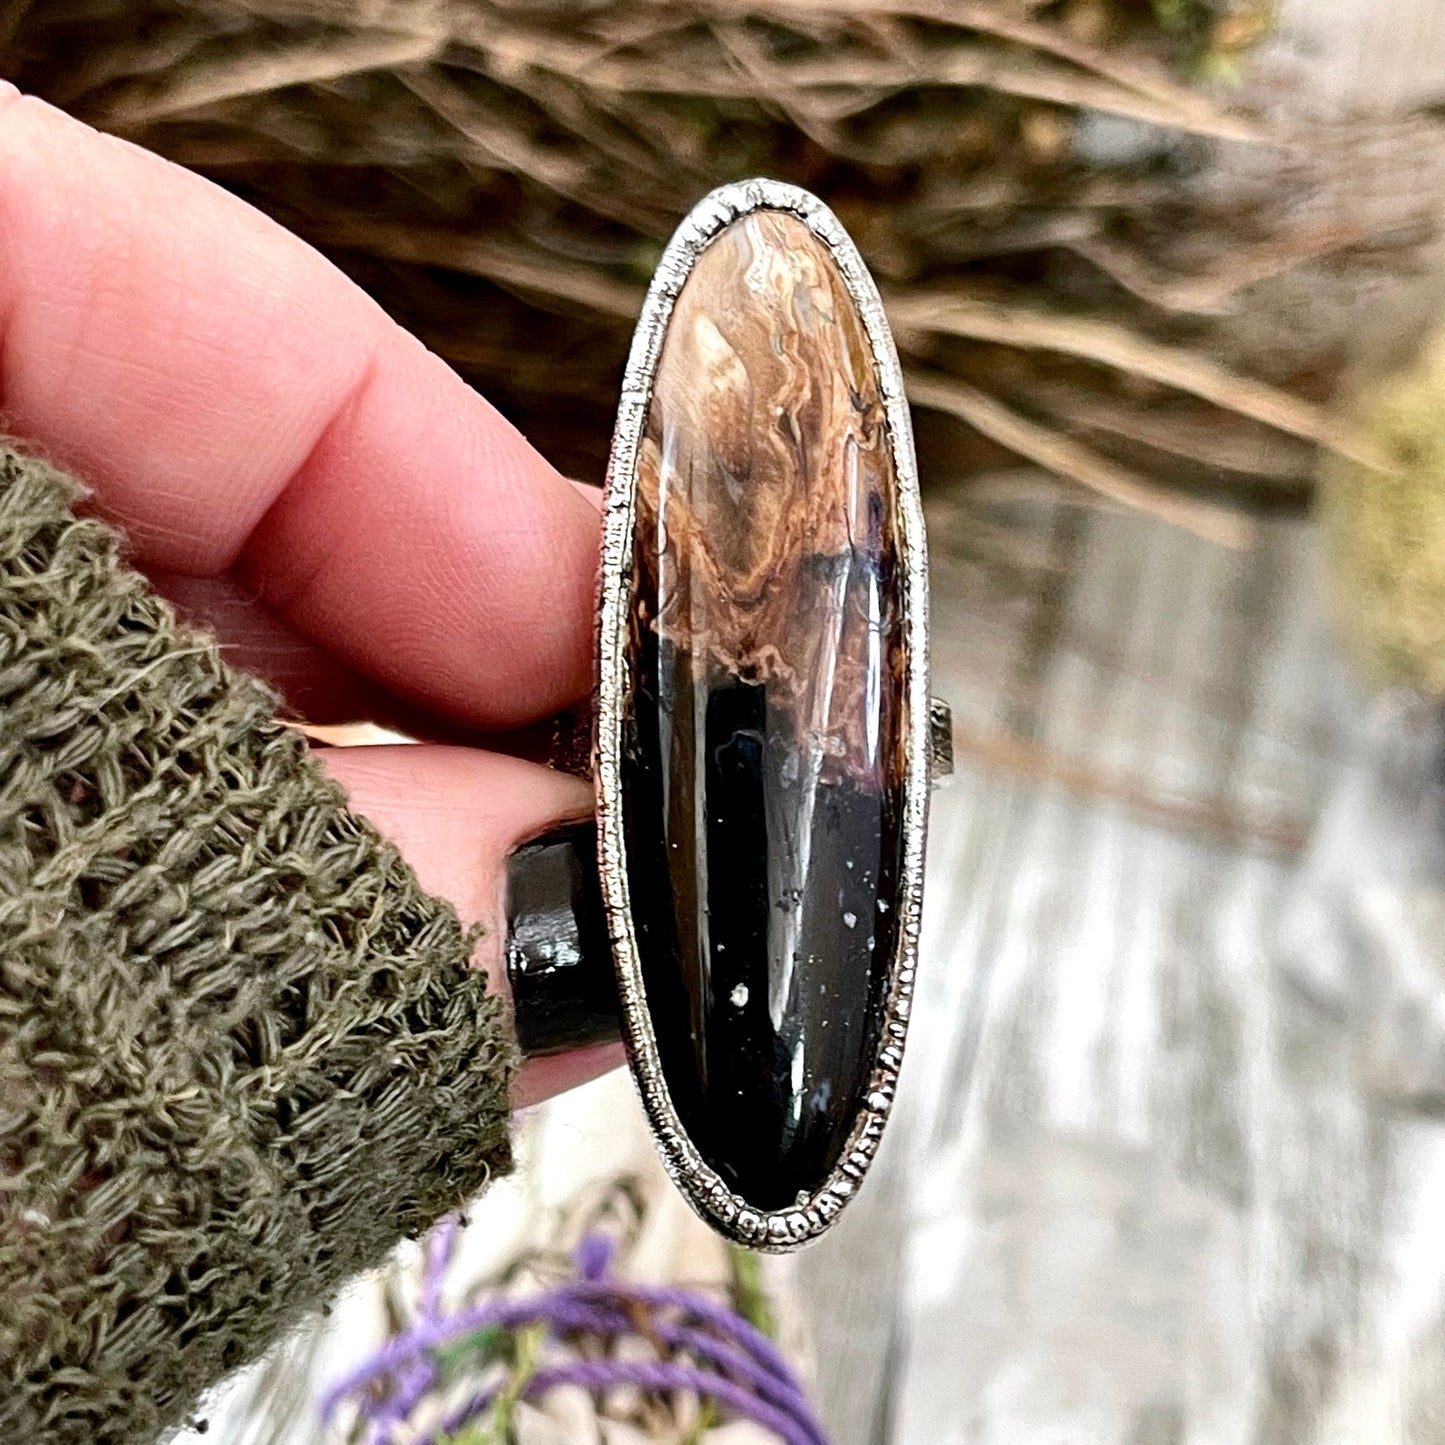 Big Bold Jewelry, Big Crystal Ring, Big Silver Ring, Big Stone Ring, Etsy ID: 1414525689, Fossilized Palm Root, FOXLARK- RINGS, Jewelry, Large Boho Ring, Large Crystal Ring, Large Stone Ring, Natural stone ring, Rings, silver crystal ring, Silver Stone Je